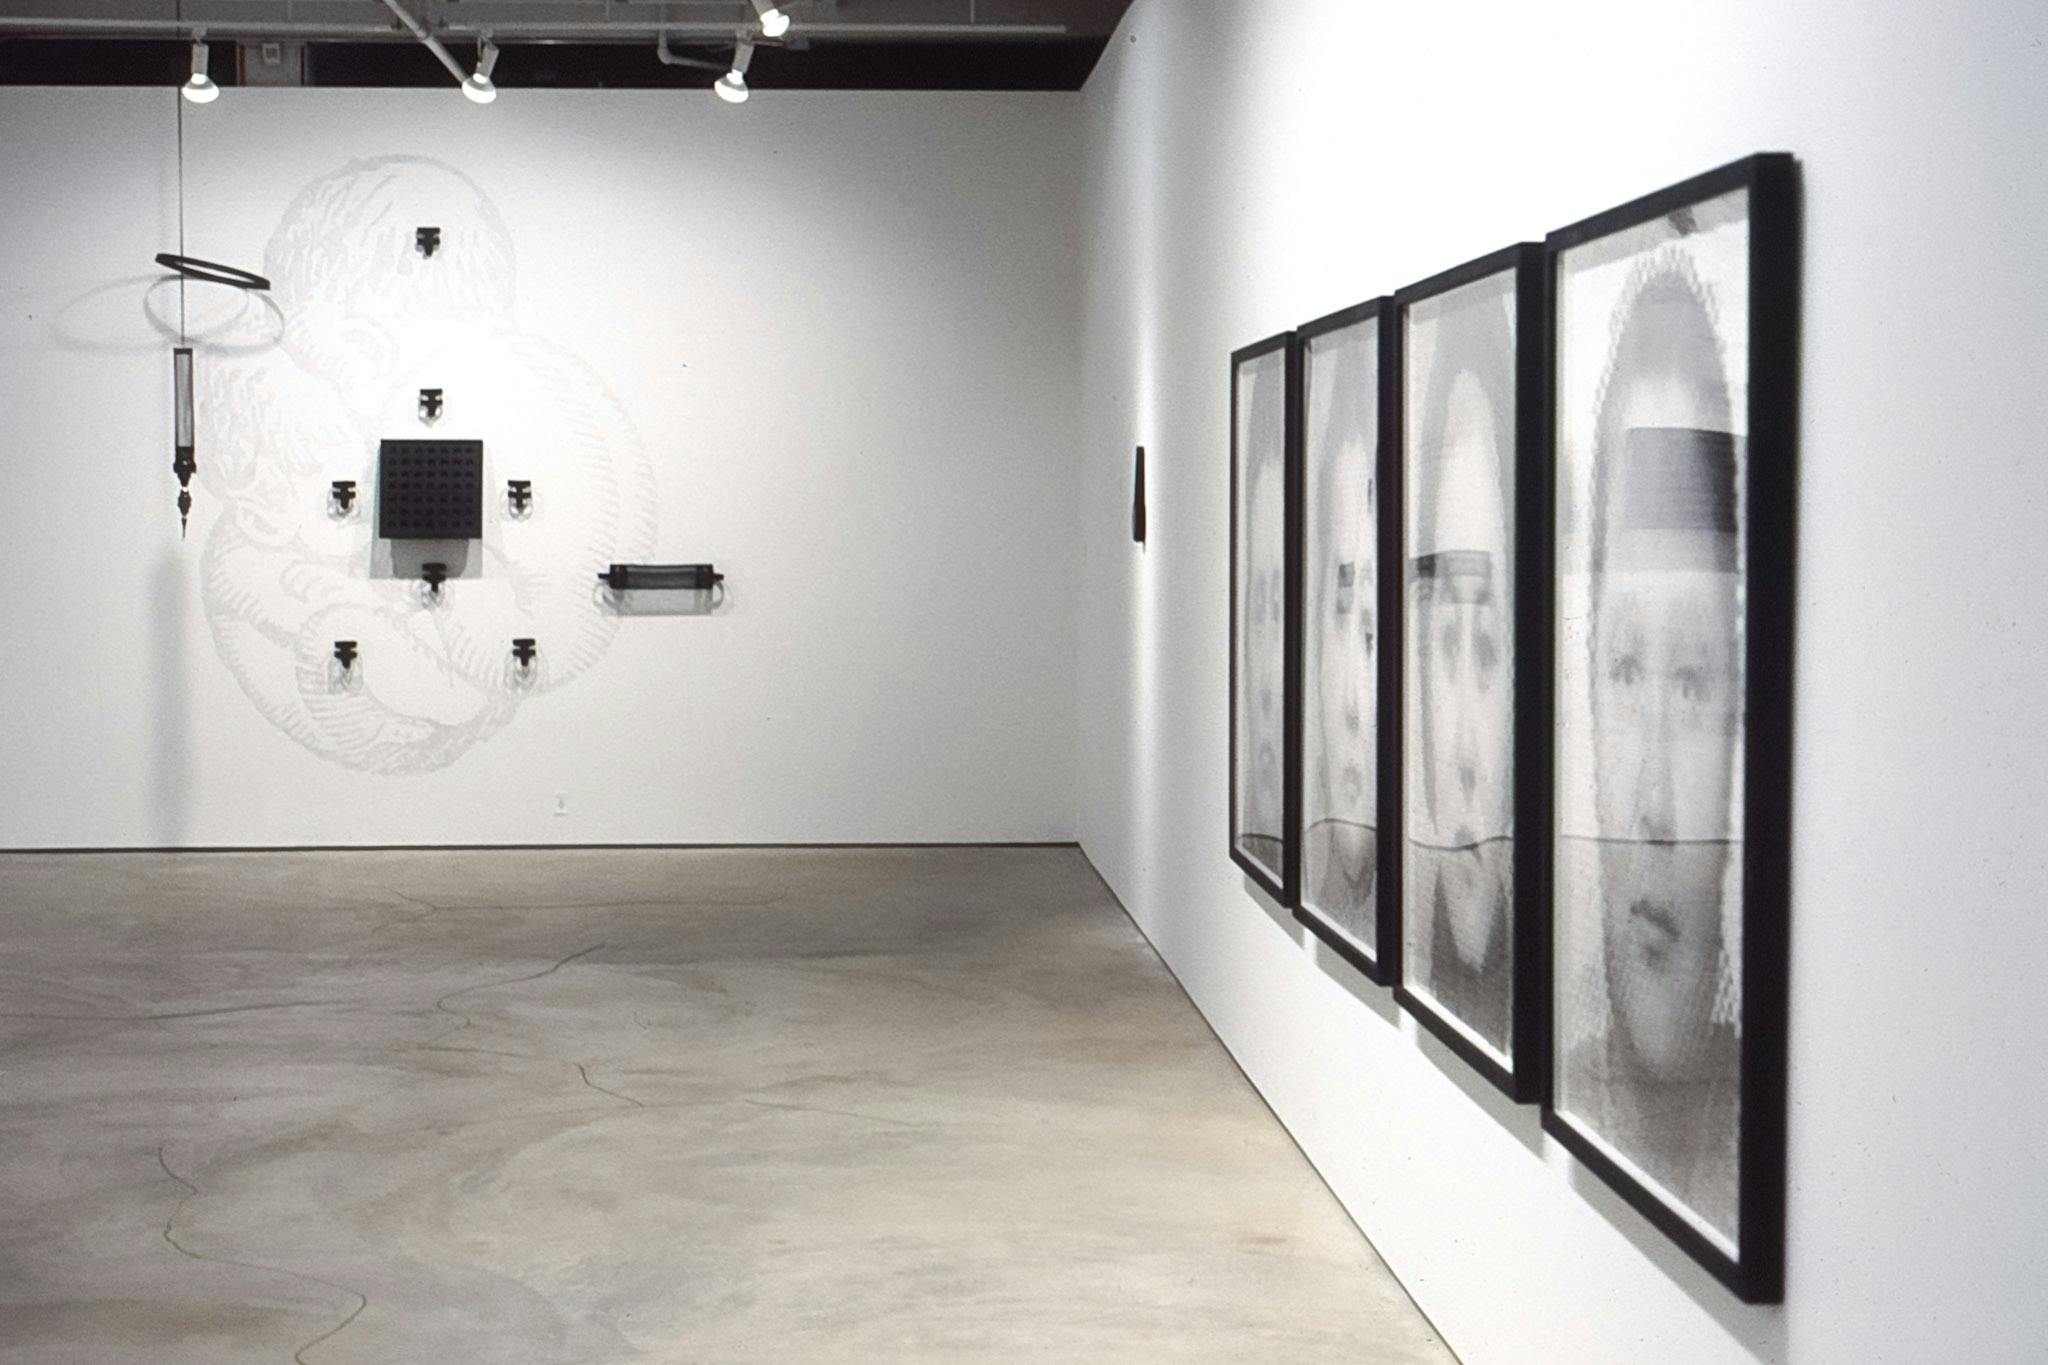 An installation view of the gallery shows four black and white portrait photographs on the right-side wall. On another wall, a group of black sculpture works are mounted. 